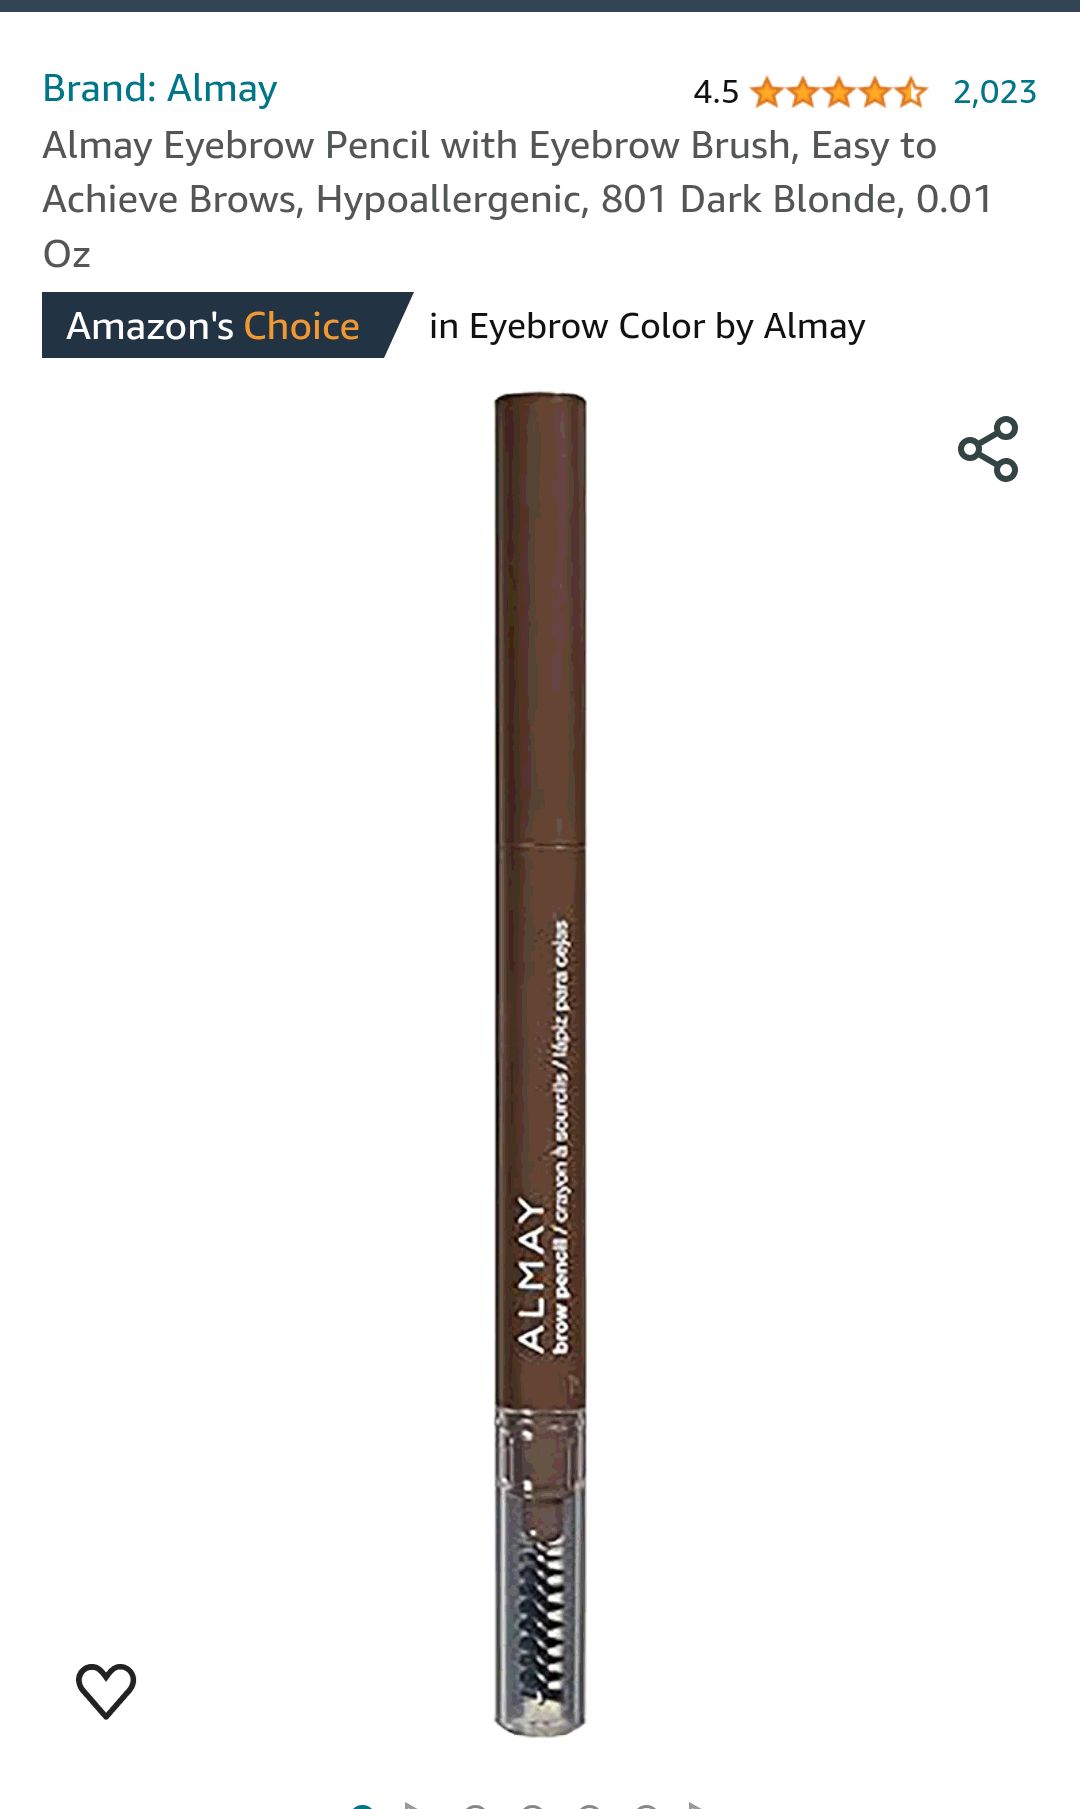 Amazon.com : Almay Eyebrow Pencil with Eyebrow Brush, Easy to Achieve Brows, Hypoallergenic, 801 Dark Blonde, 0.01 Oz : Beauty & Personal Care